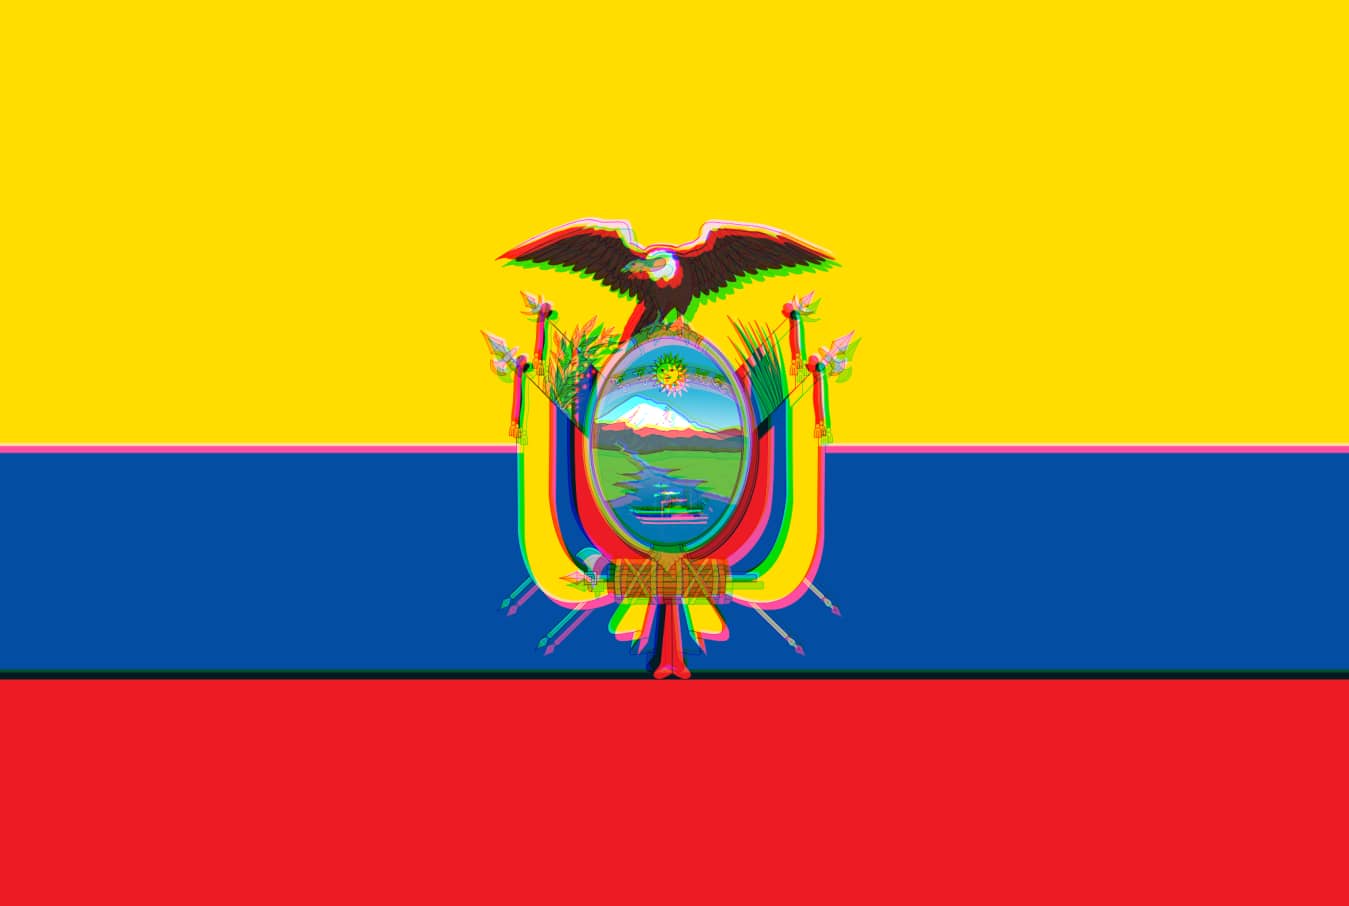 Every Ecuadorian has been compromised in massive data breach